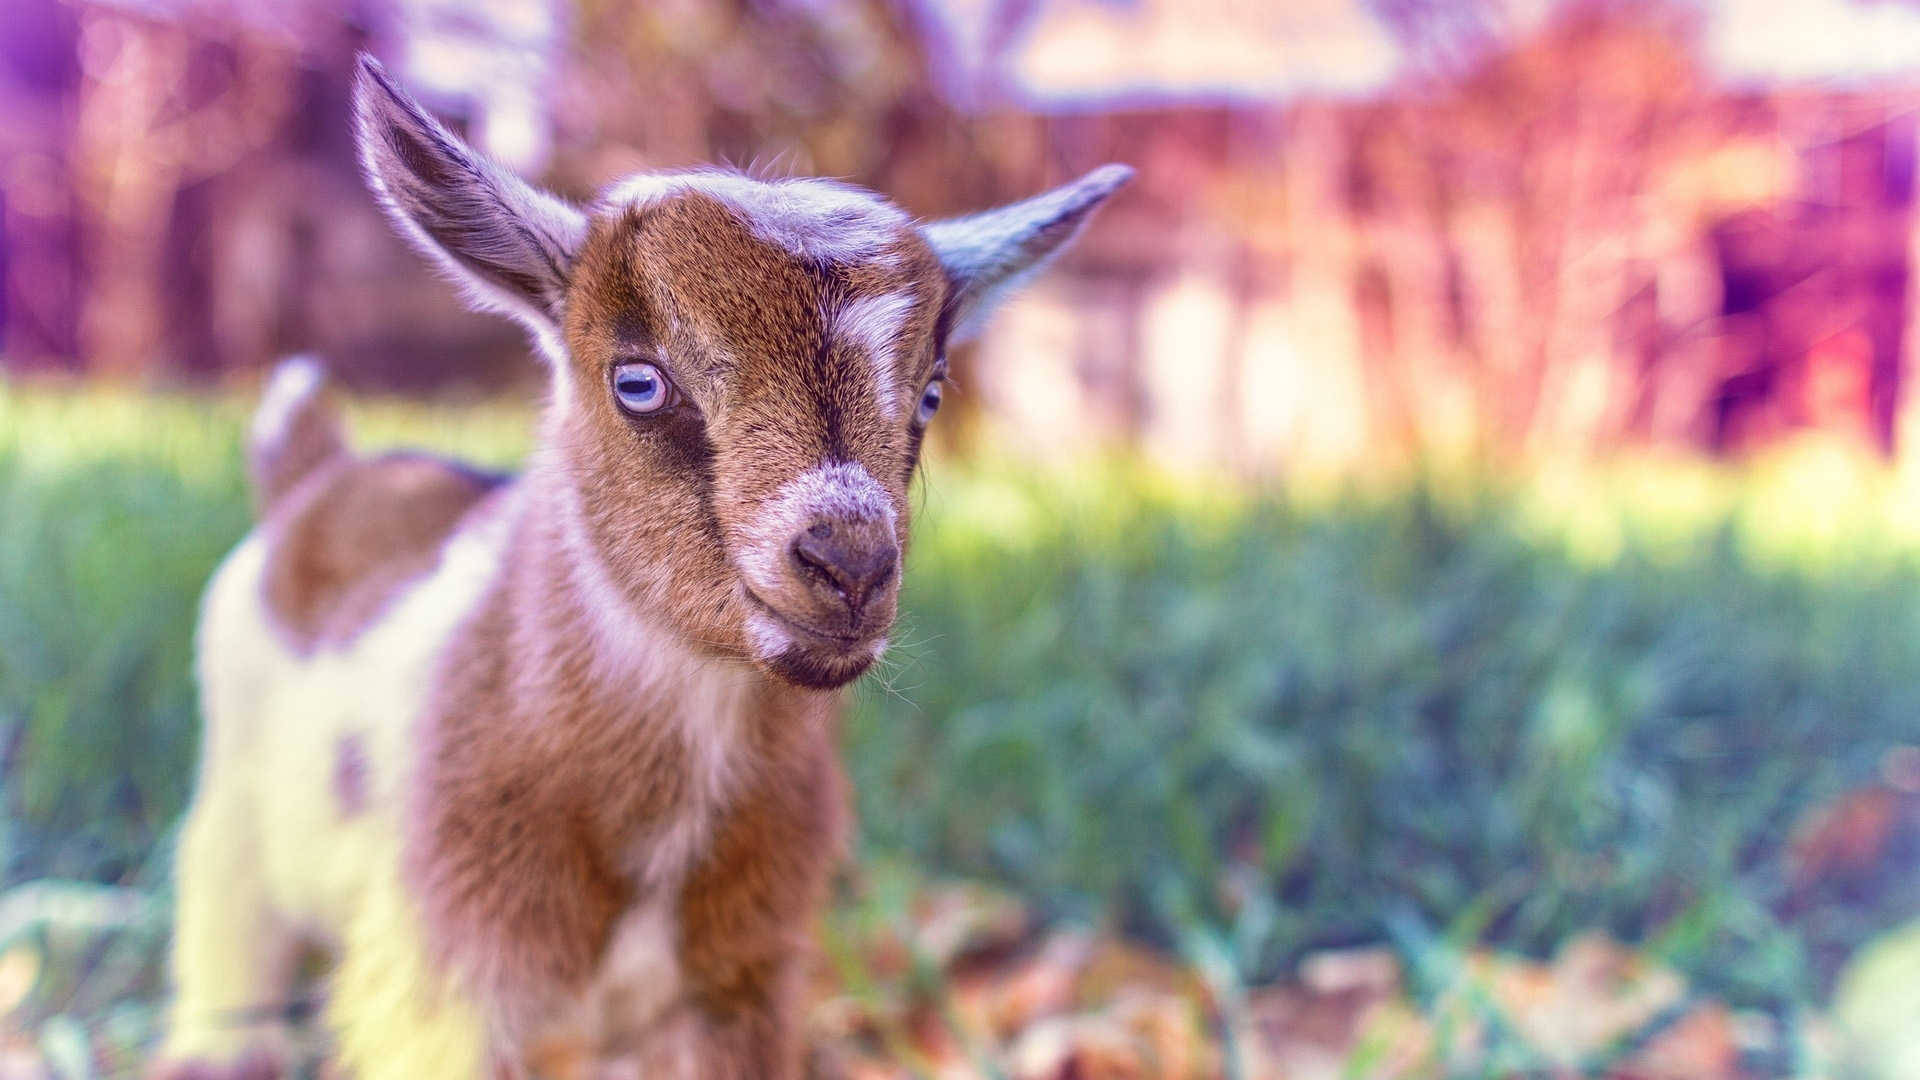 Colorful Close-up Of Baby Goat Wallpaper